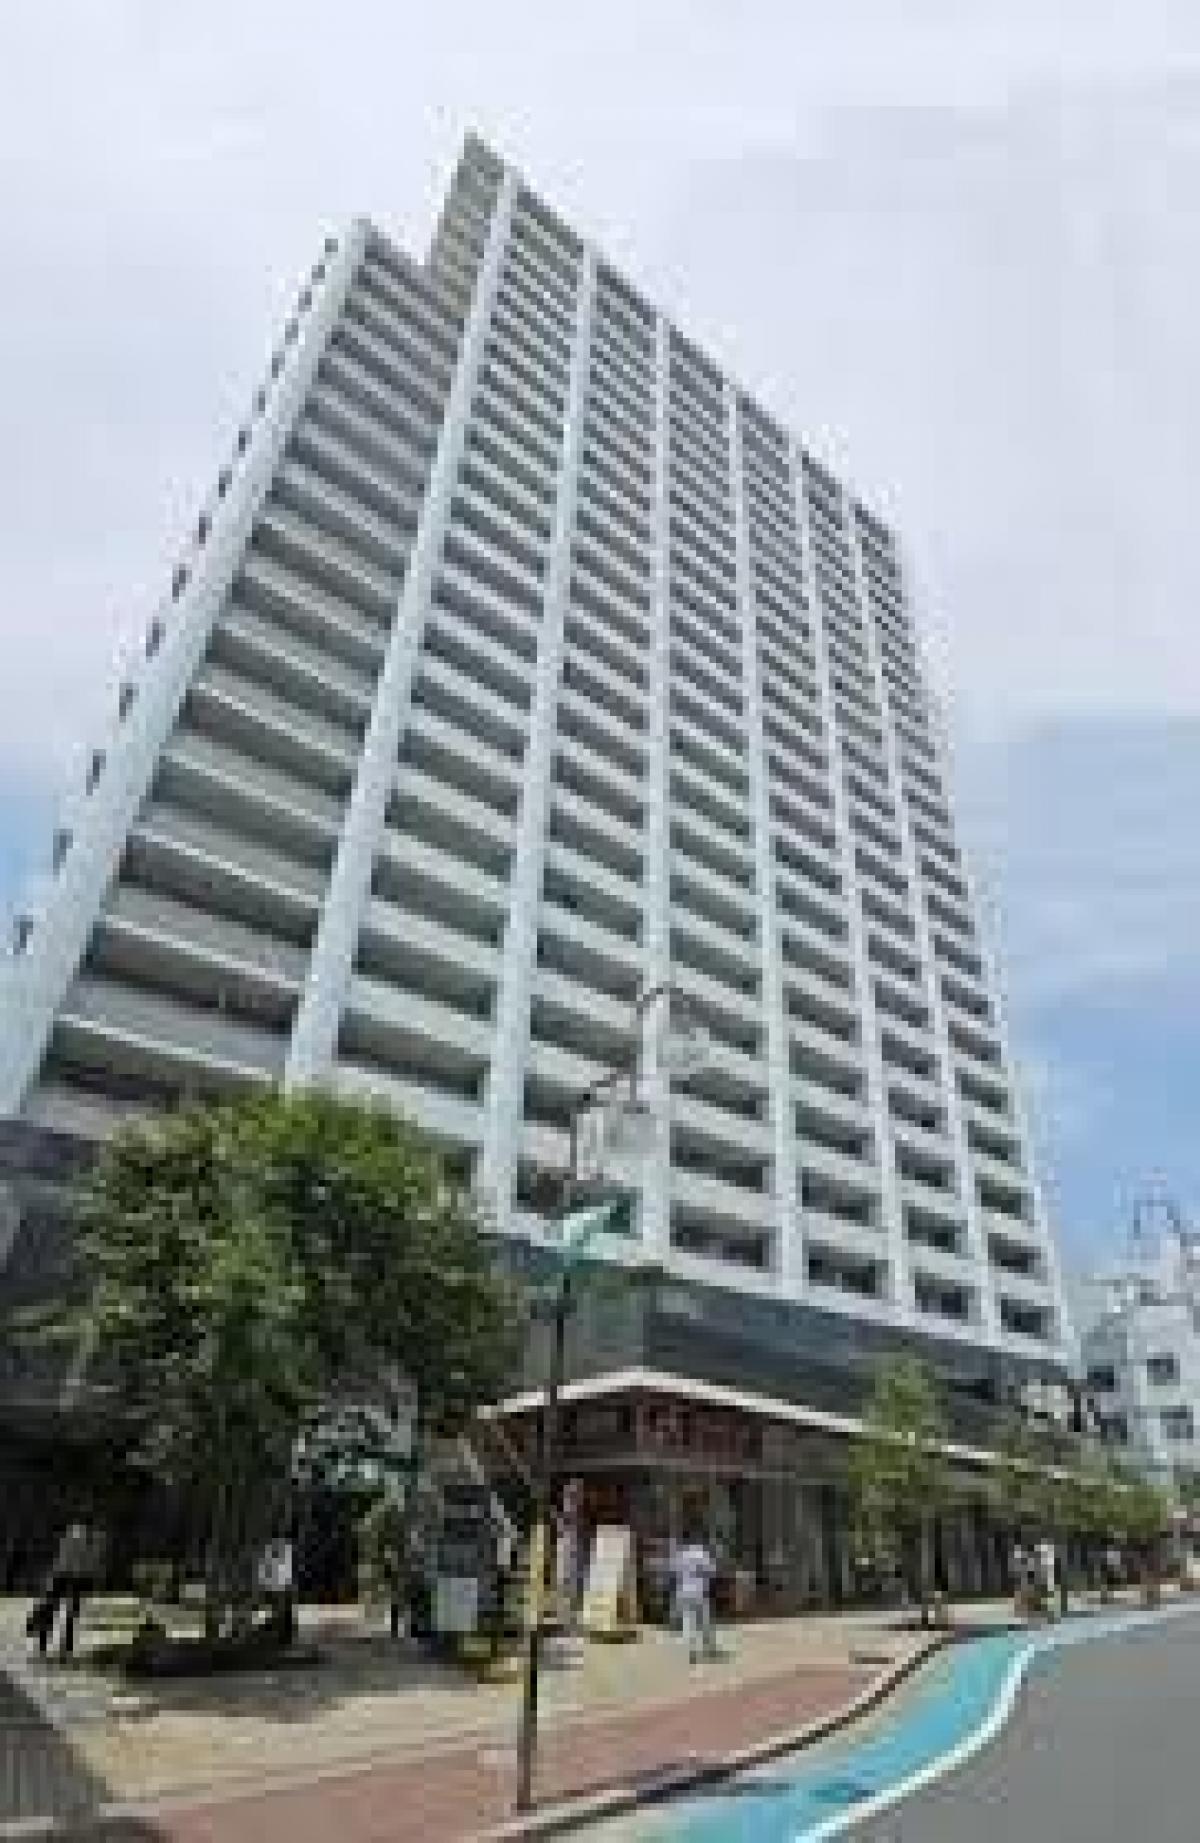 Picture of Apartment For Sale in Edogawa Ku, Tokyo, Japan